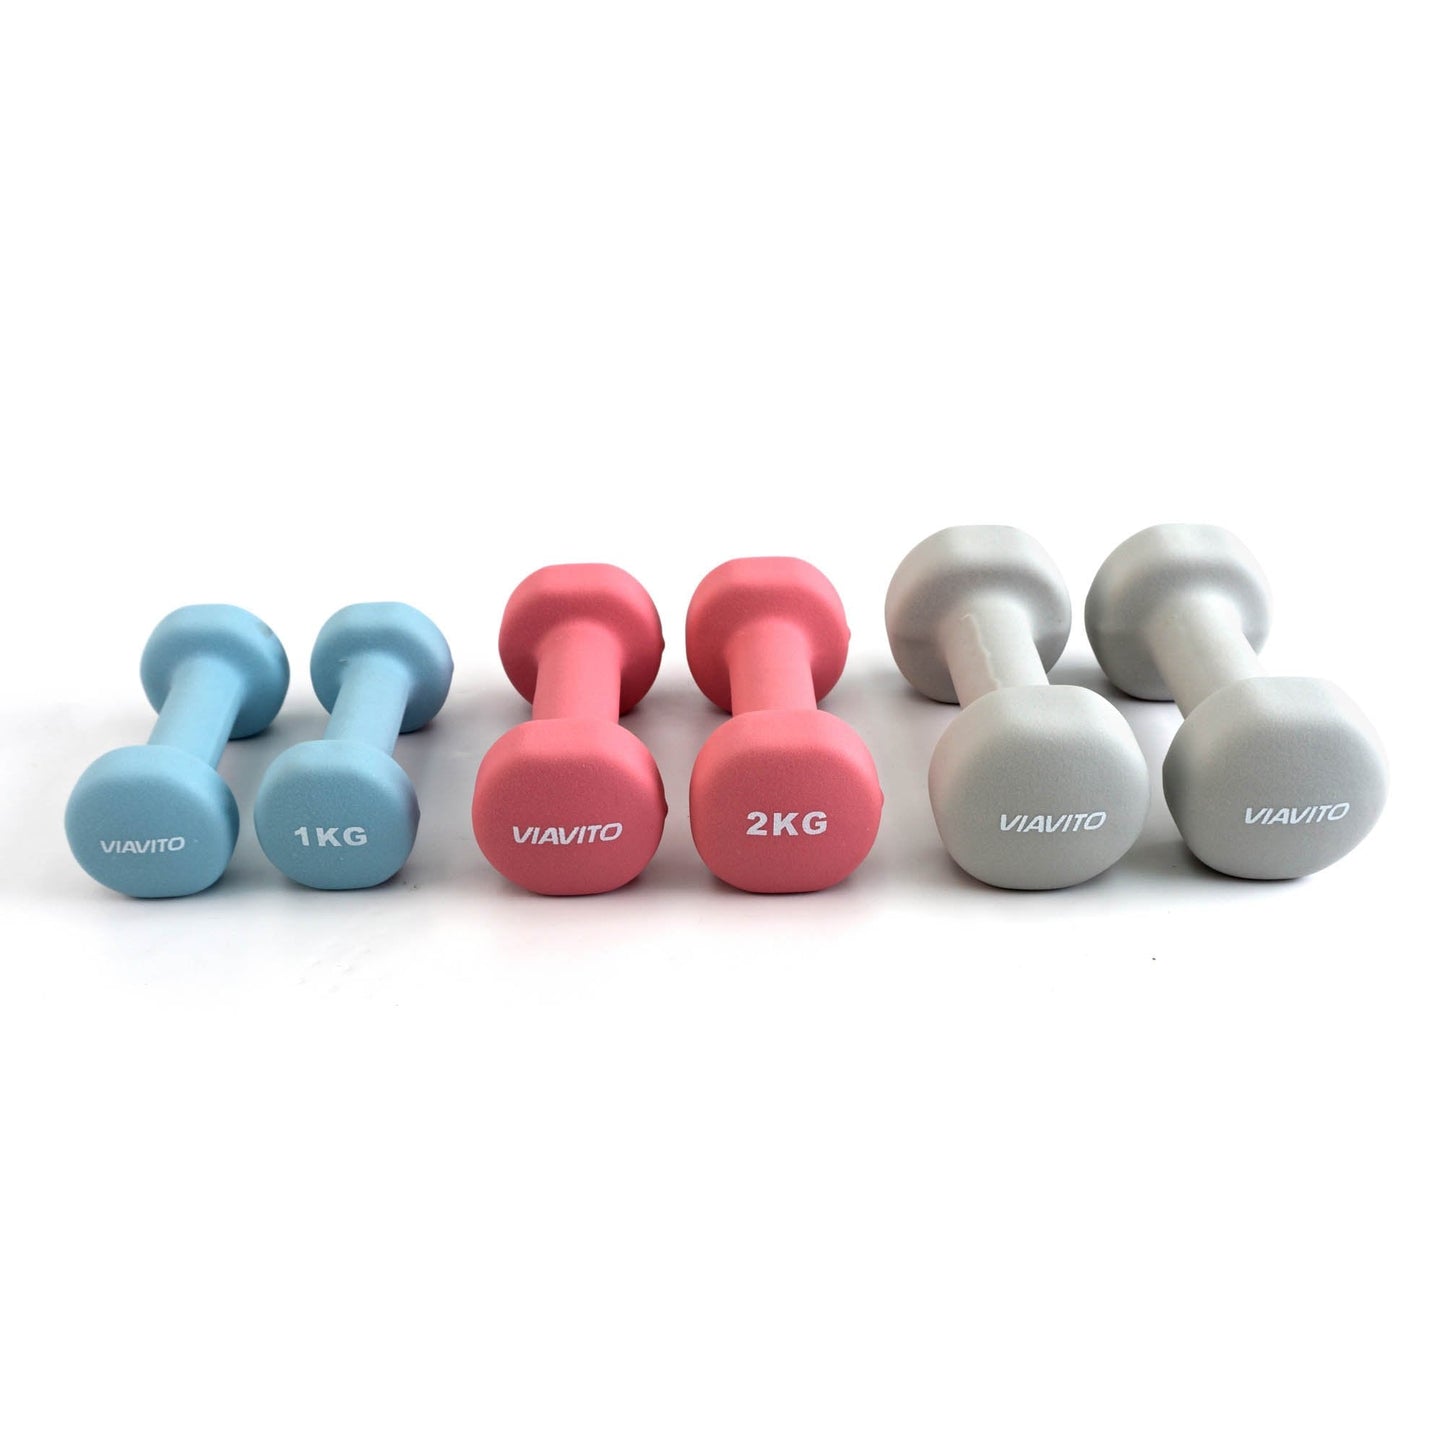 |Viavito 12kg Dumbbell Weights Set with Stand - Dumbbells1|